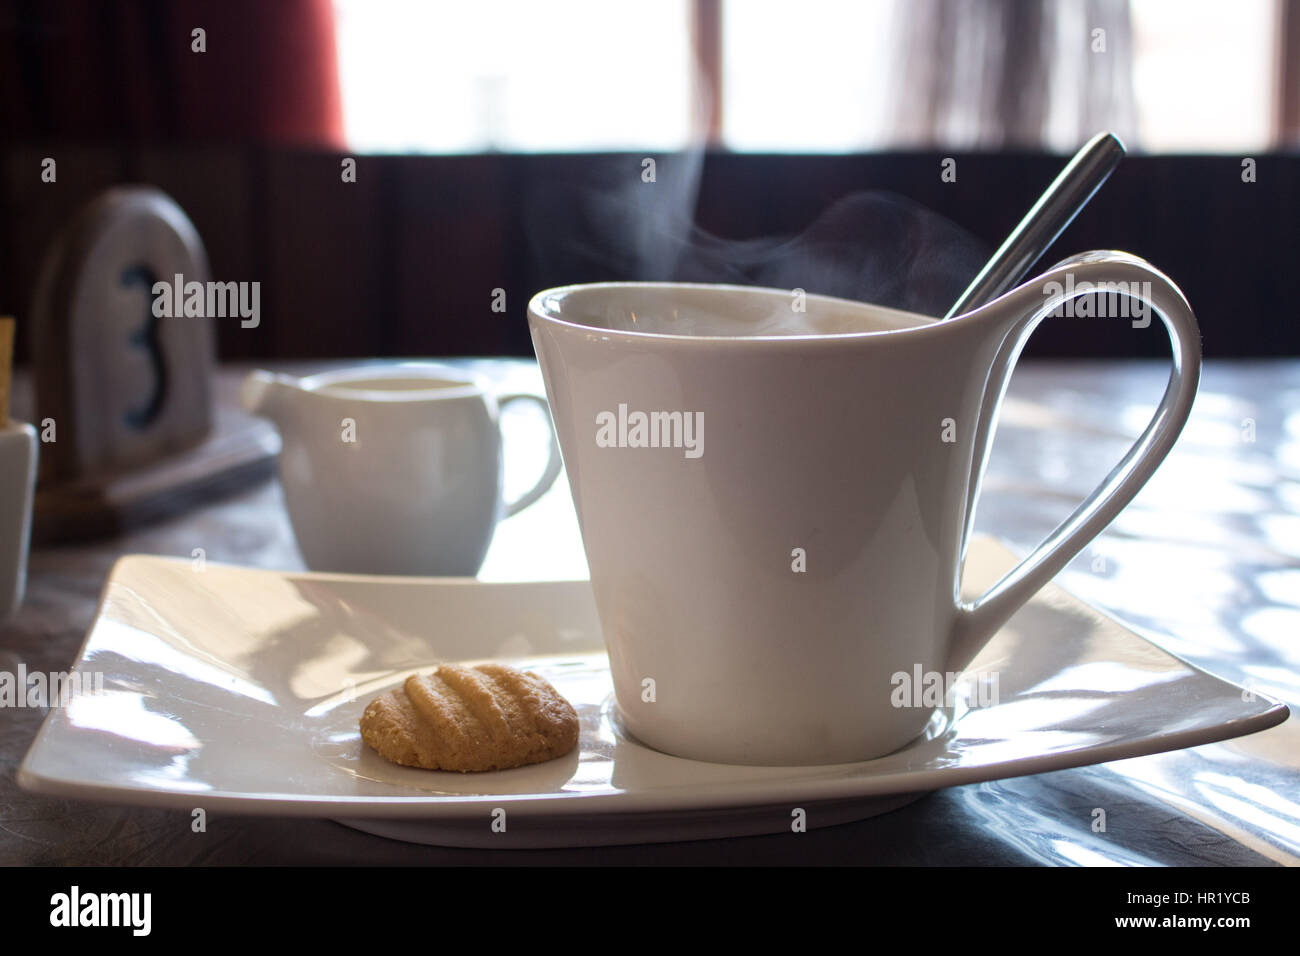 White cup of coffee on a plate with a cookie on a table, Diaz Coffee Shop, Luderitz. Namibia. Stock Photo